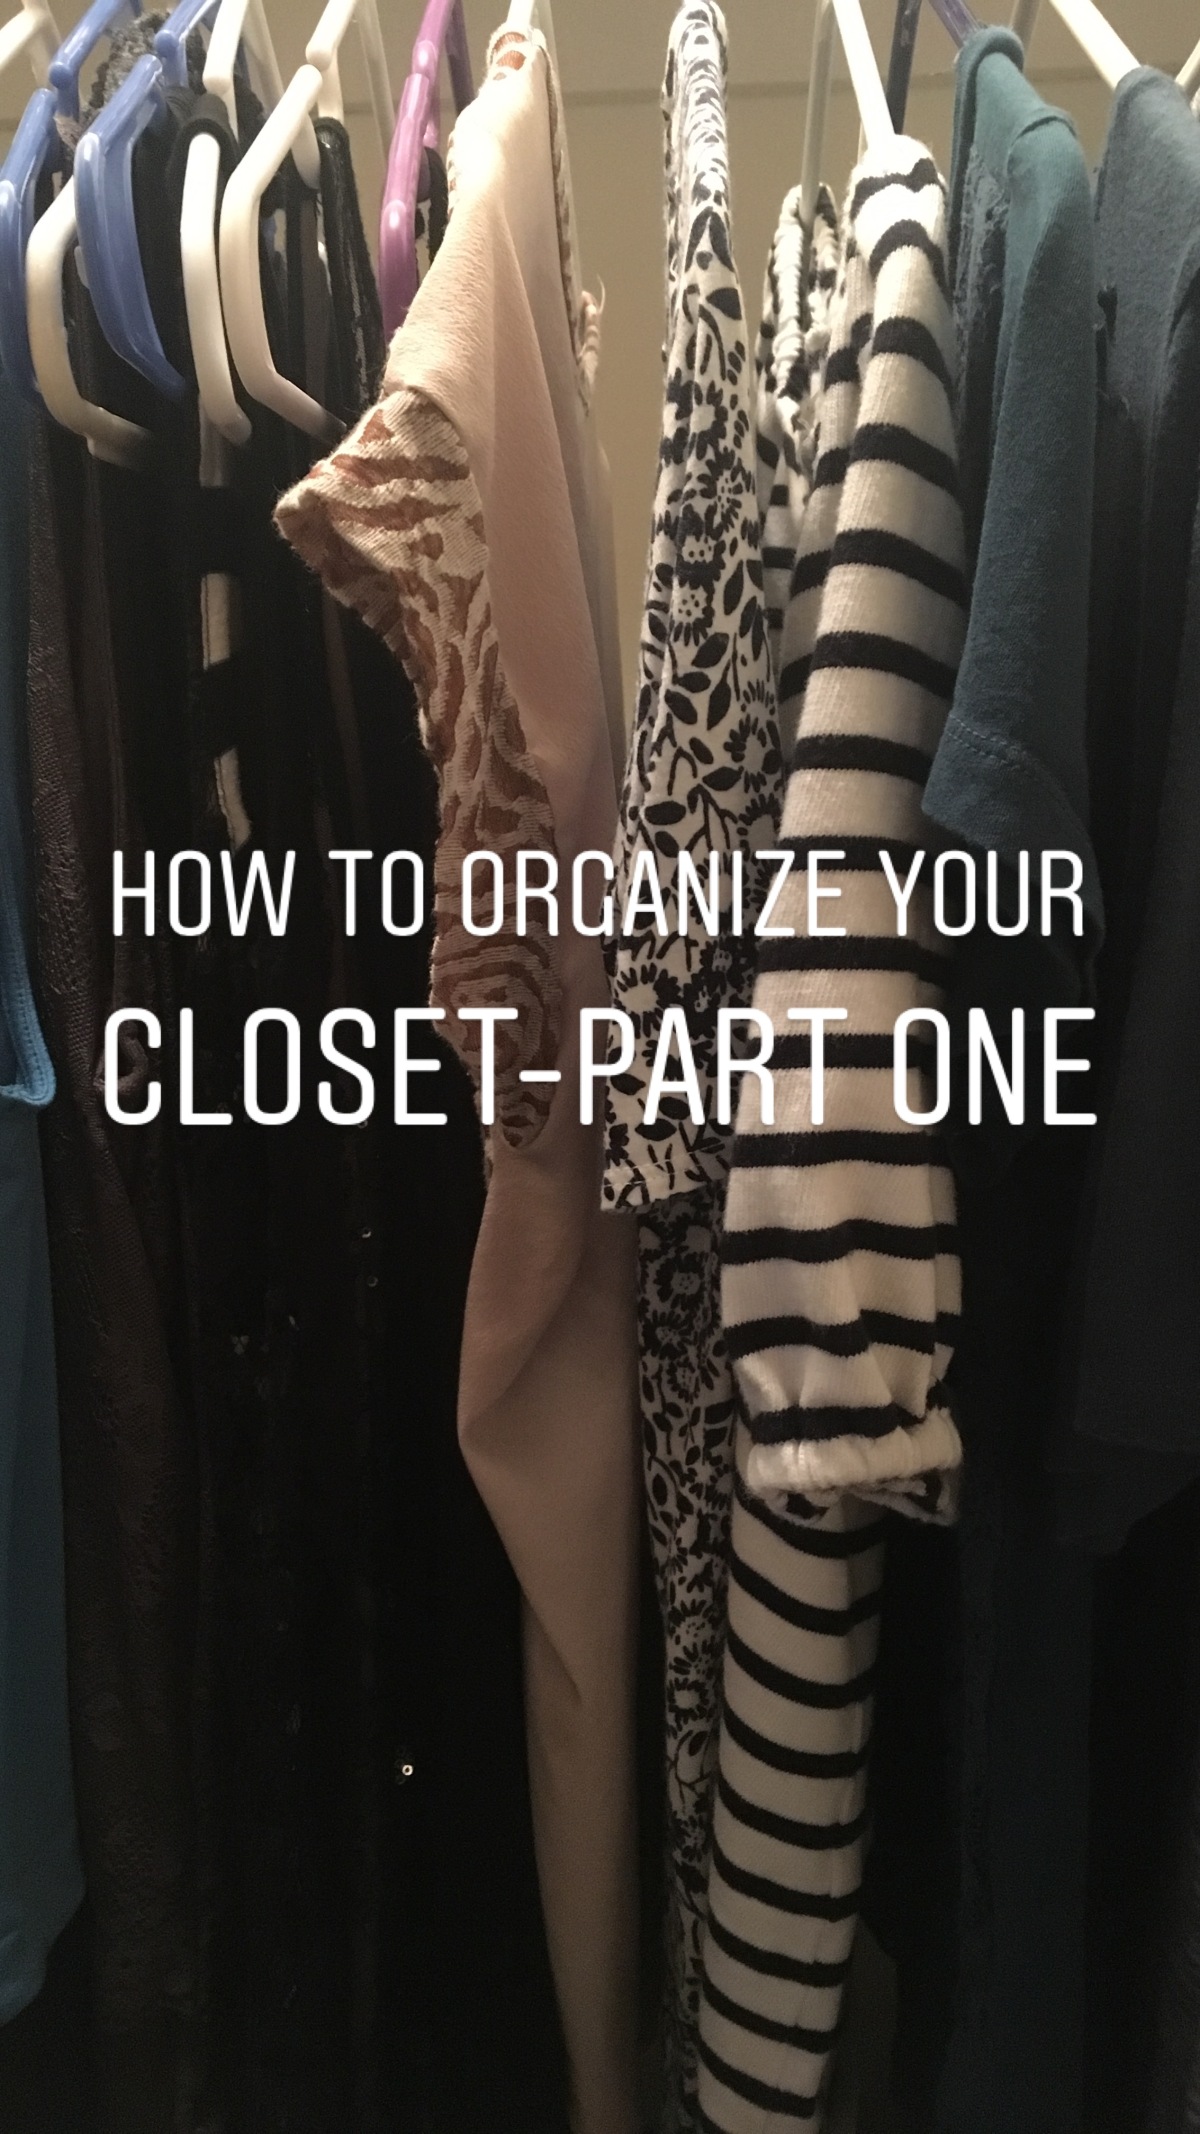 How To Organize Your Closet-Part One